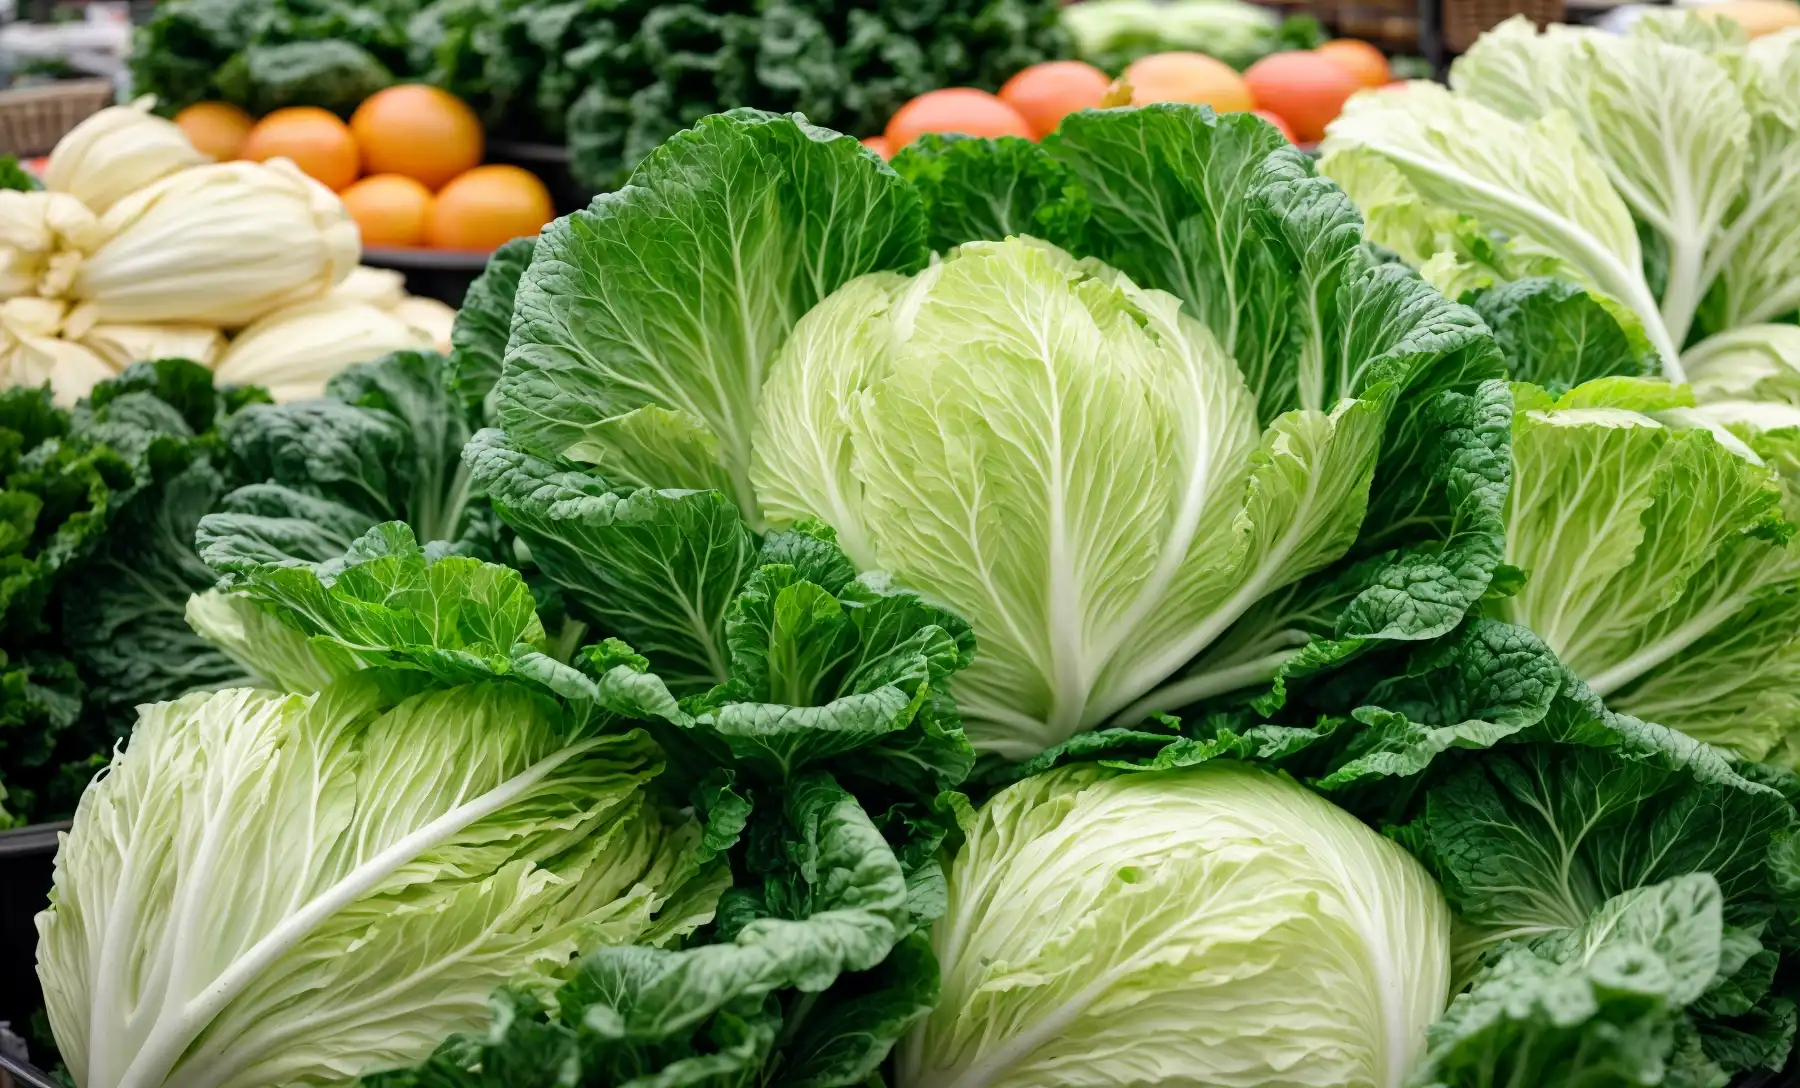 Does Napa Cabbage Look Like